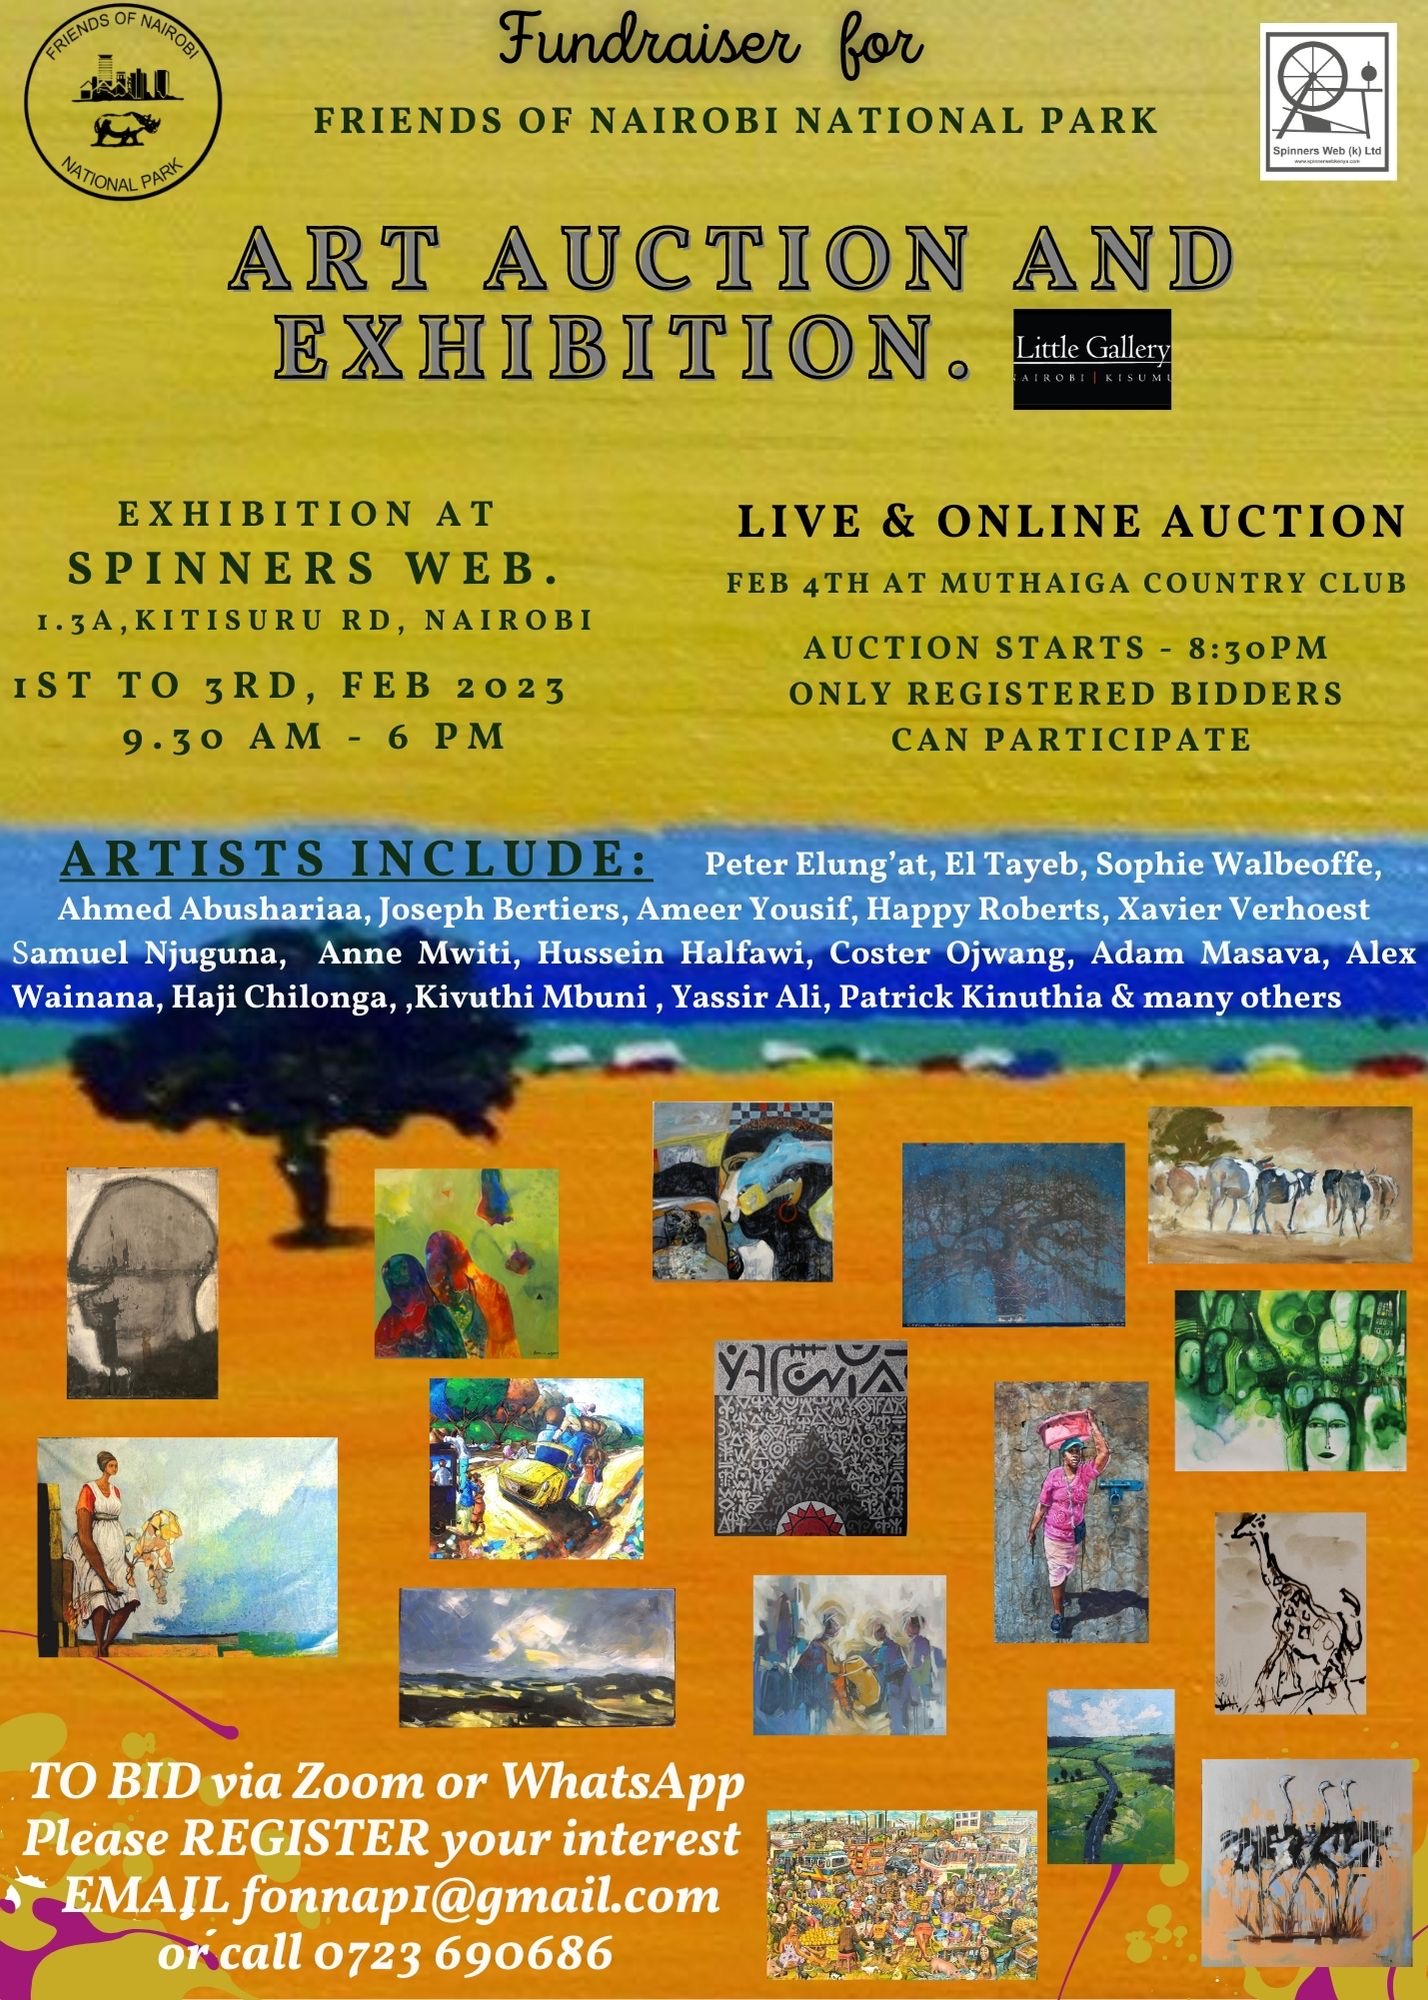 Friends of Nairobi National Park art exhibition and auction